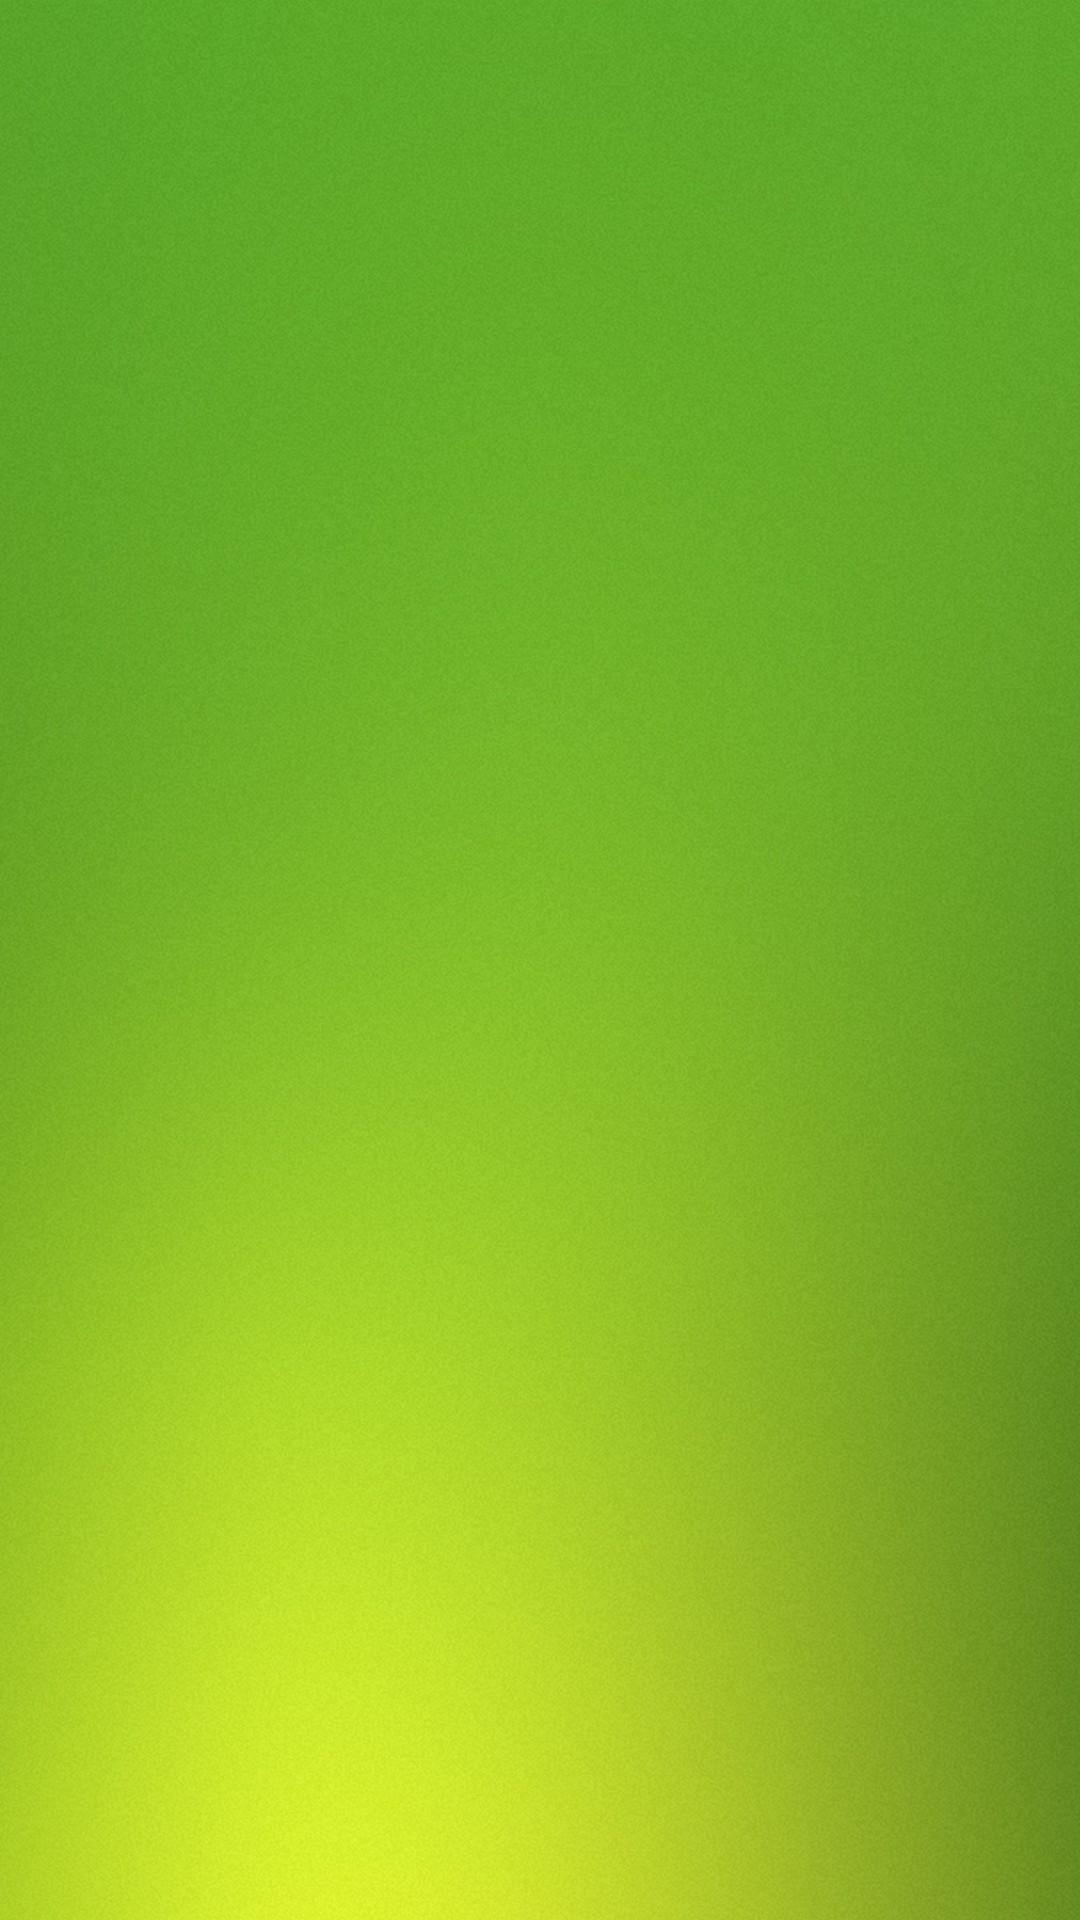 Lime Green Wallpaper Android Android Wallpaper